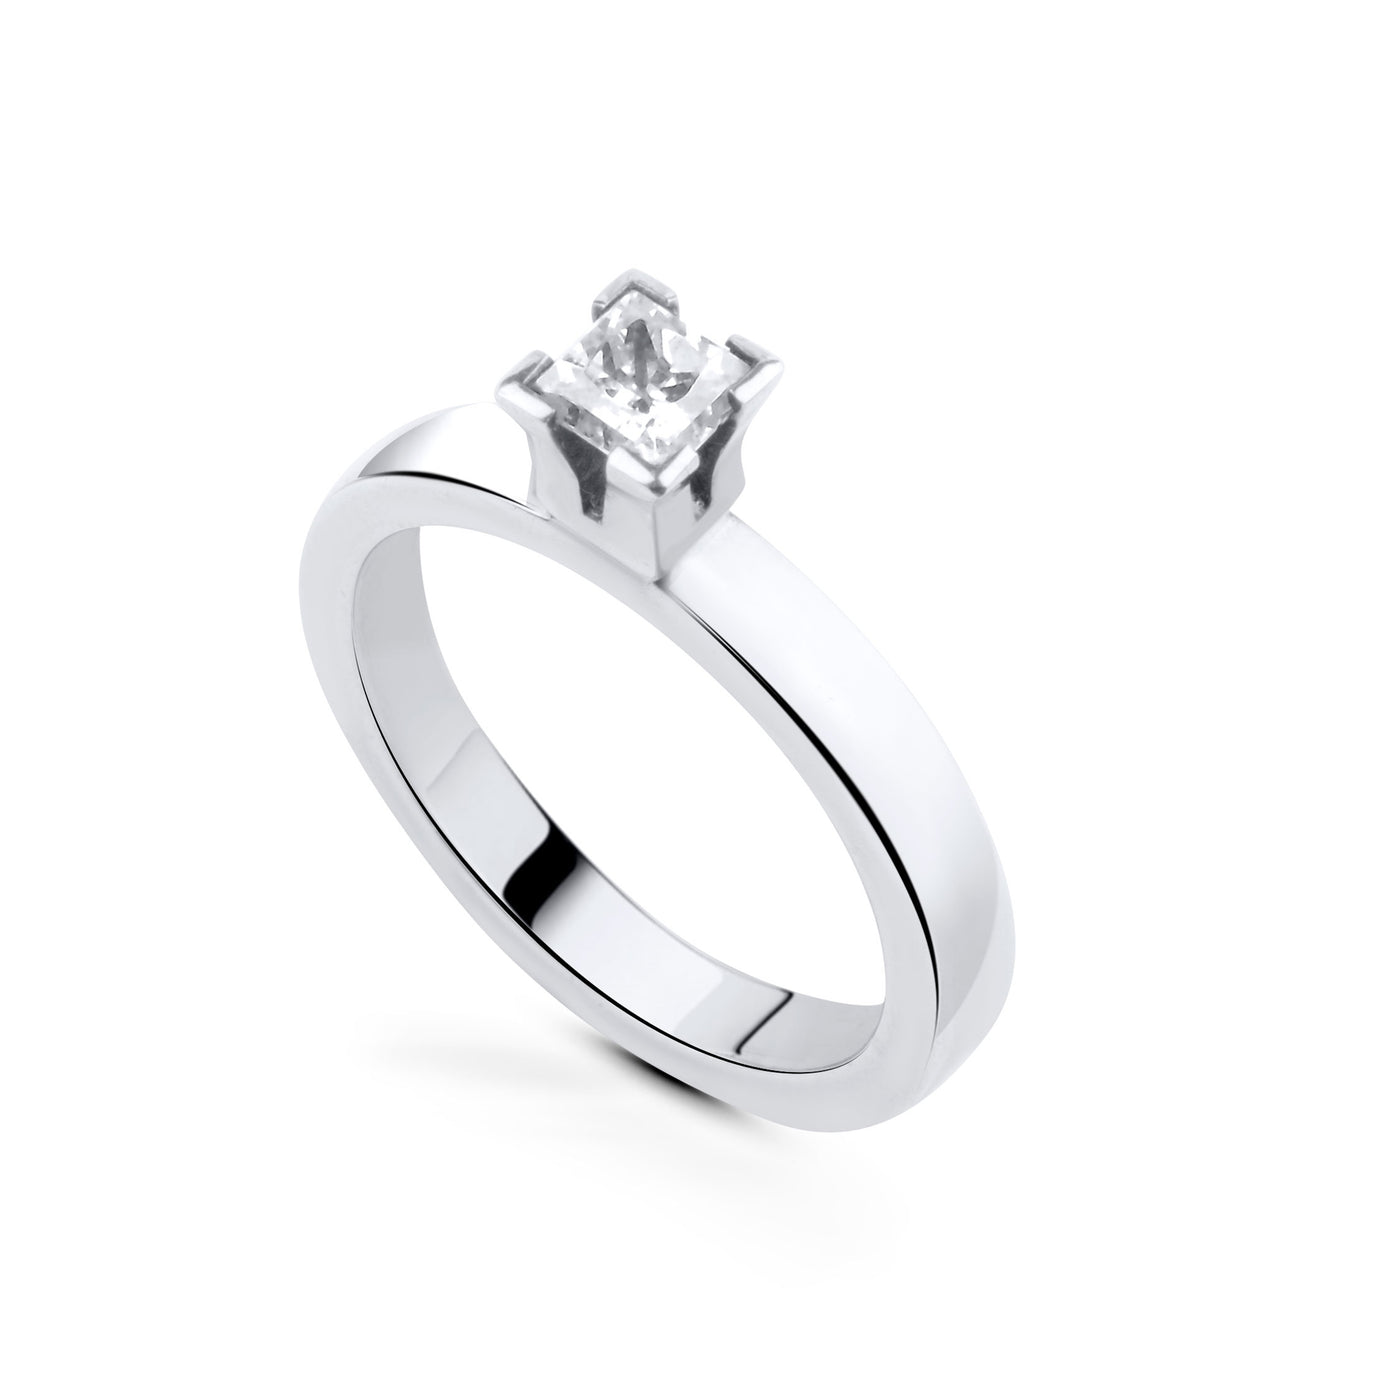 Visby ring 0,40ct - Annika Gustavsson Jewellery